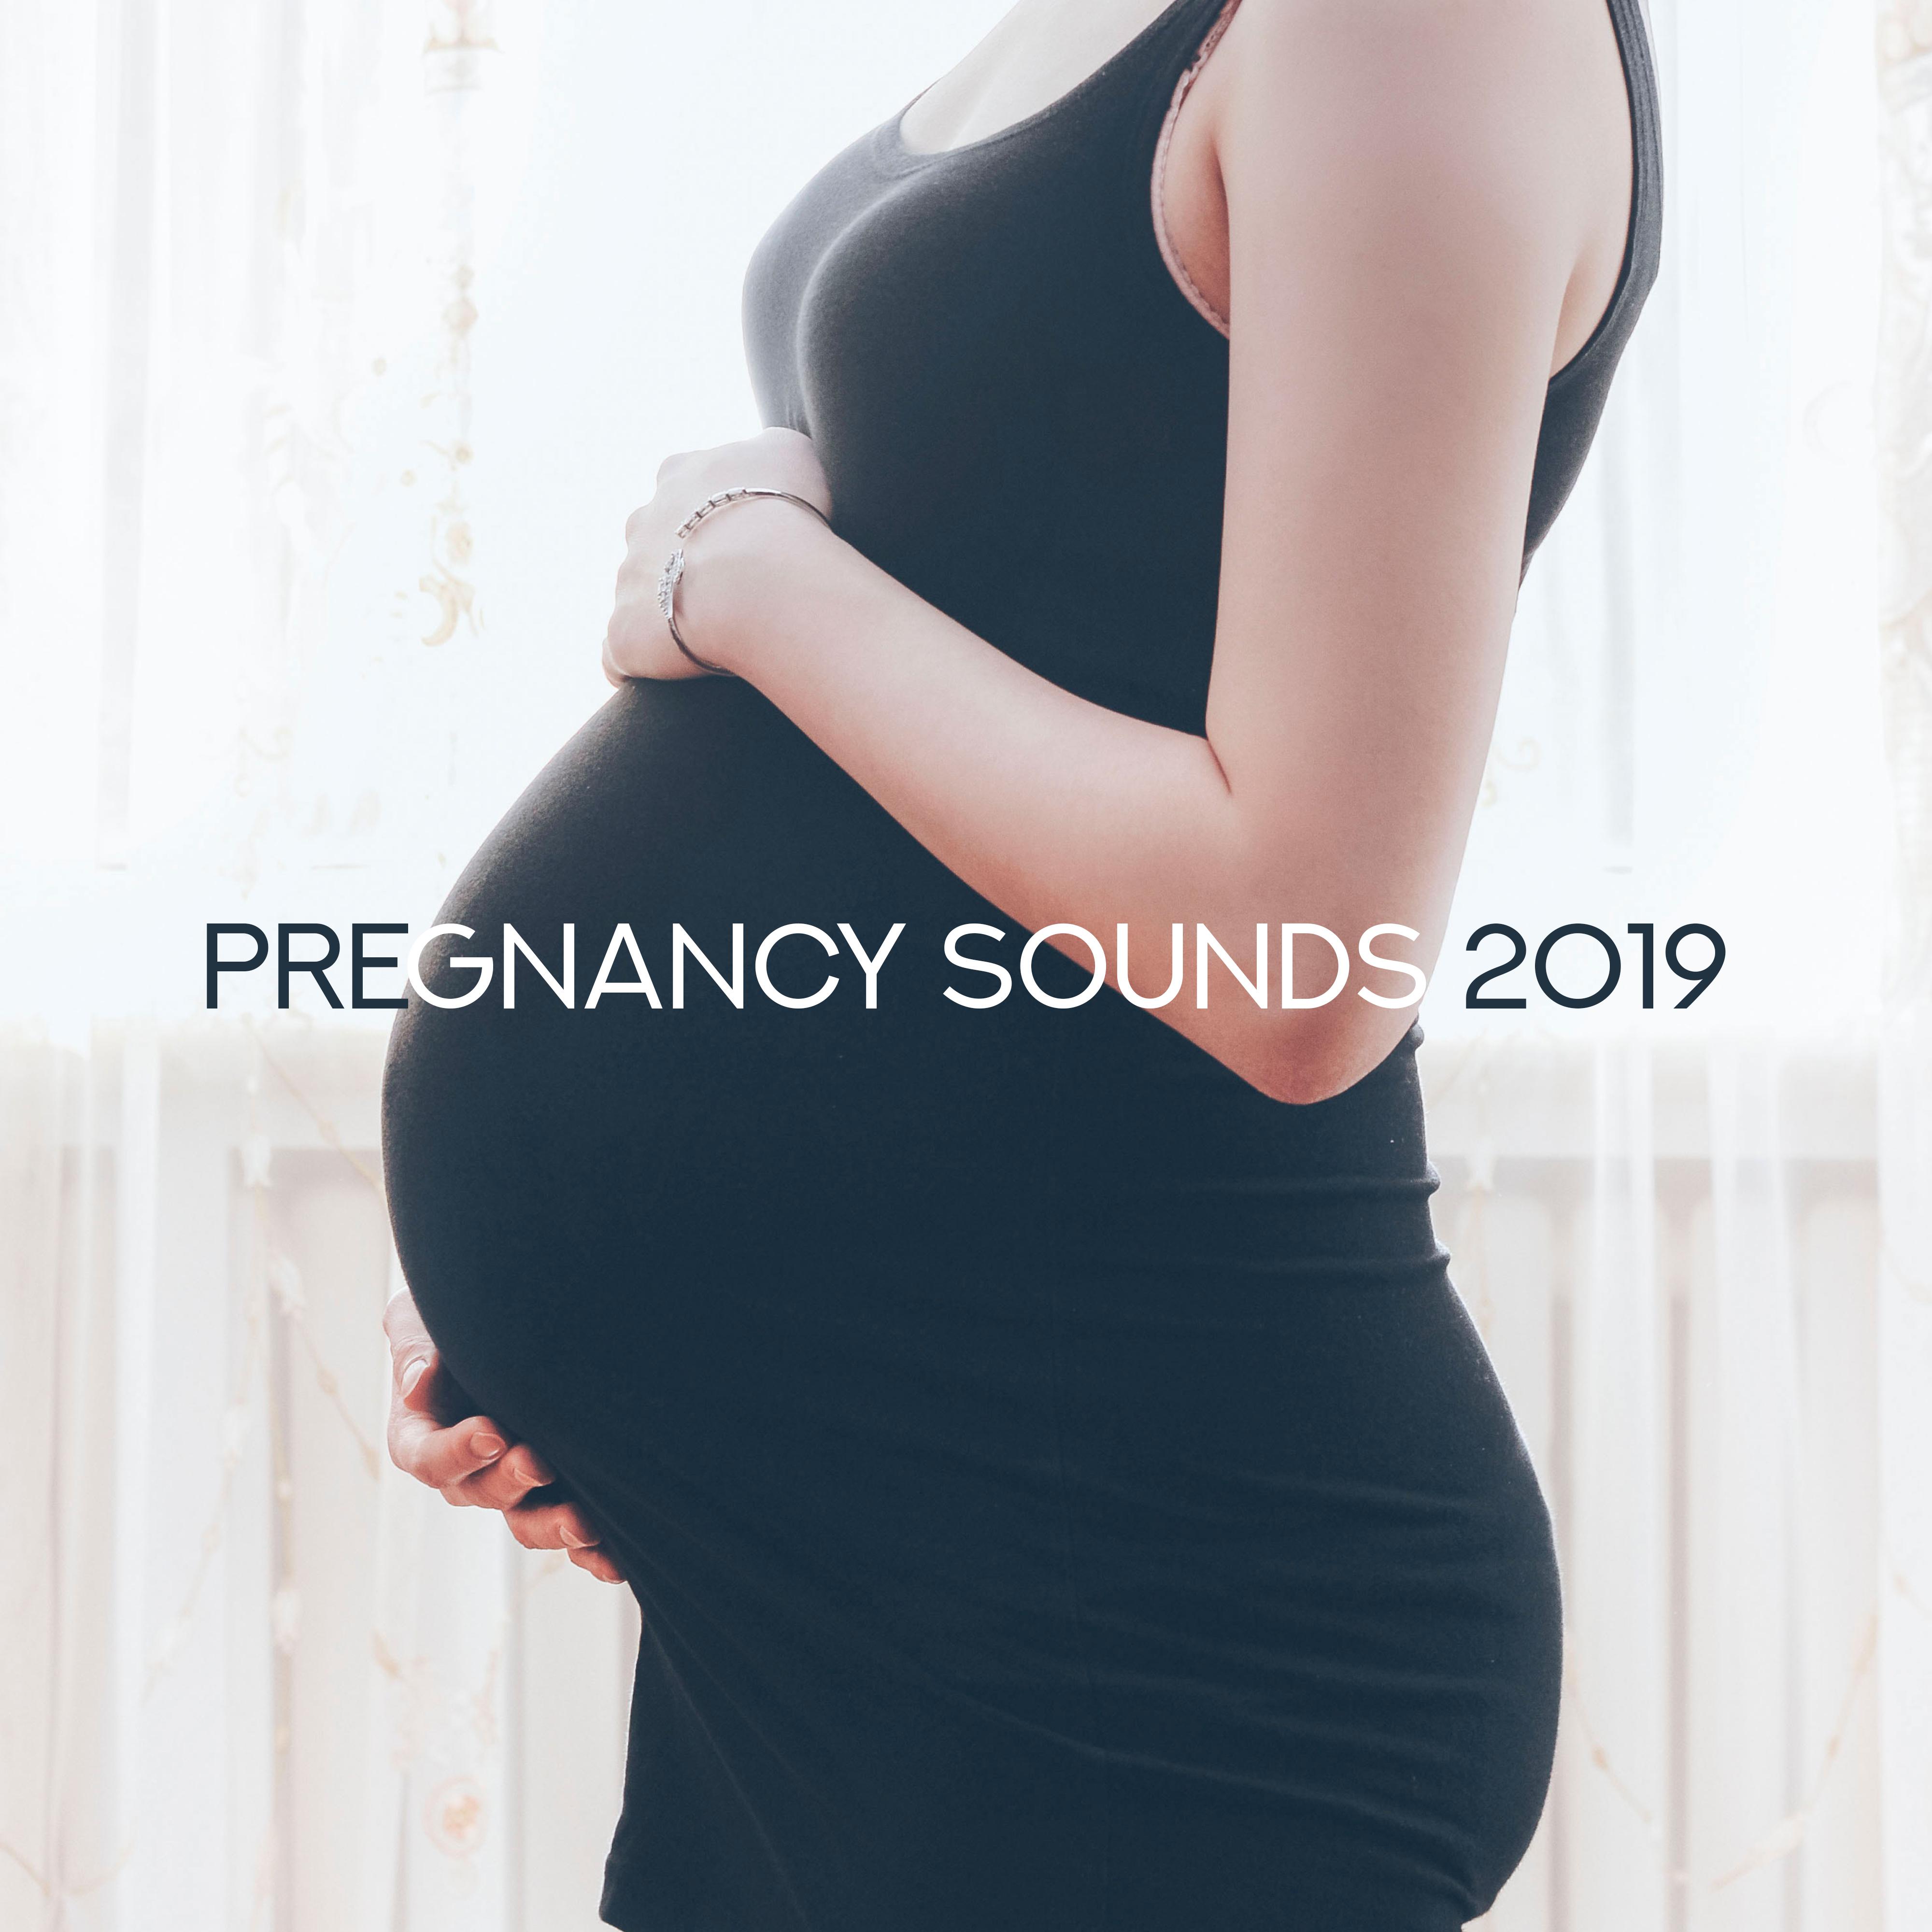 Pregnancy Sounds 2019 – Healing Therapy, Calming Zen, Soothing Pregnancy Music, Deep Harmony, Relaxing Sounds to Calm Down, Stress Relief